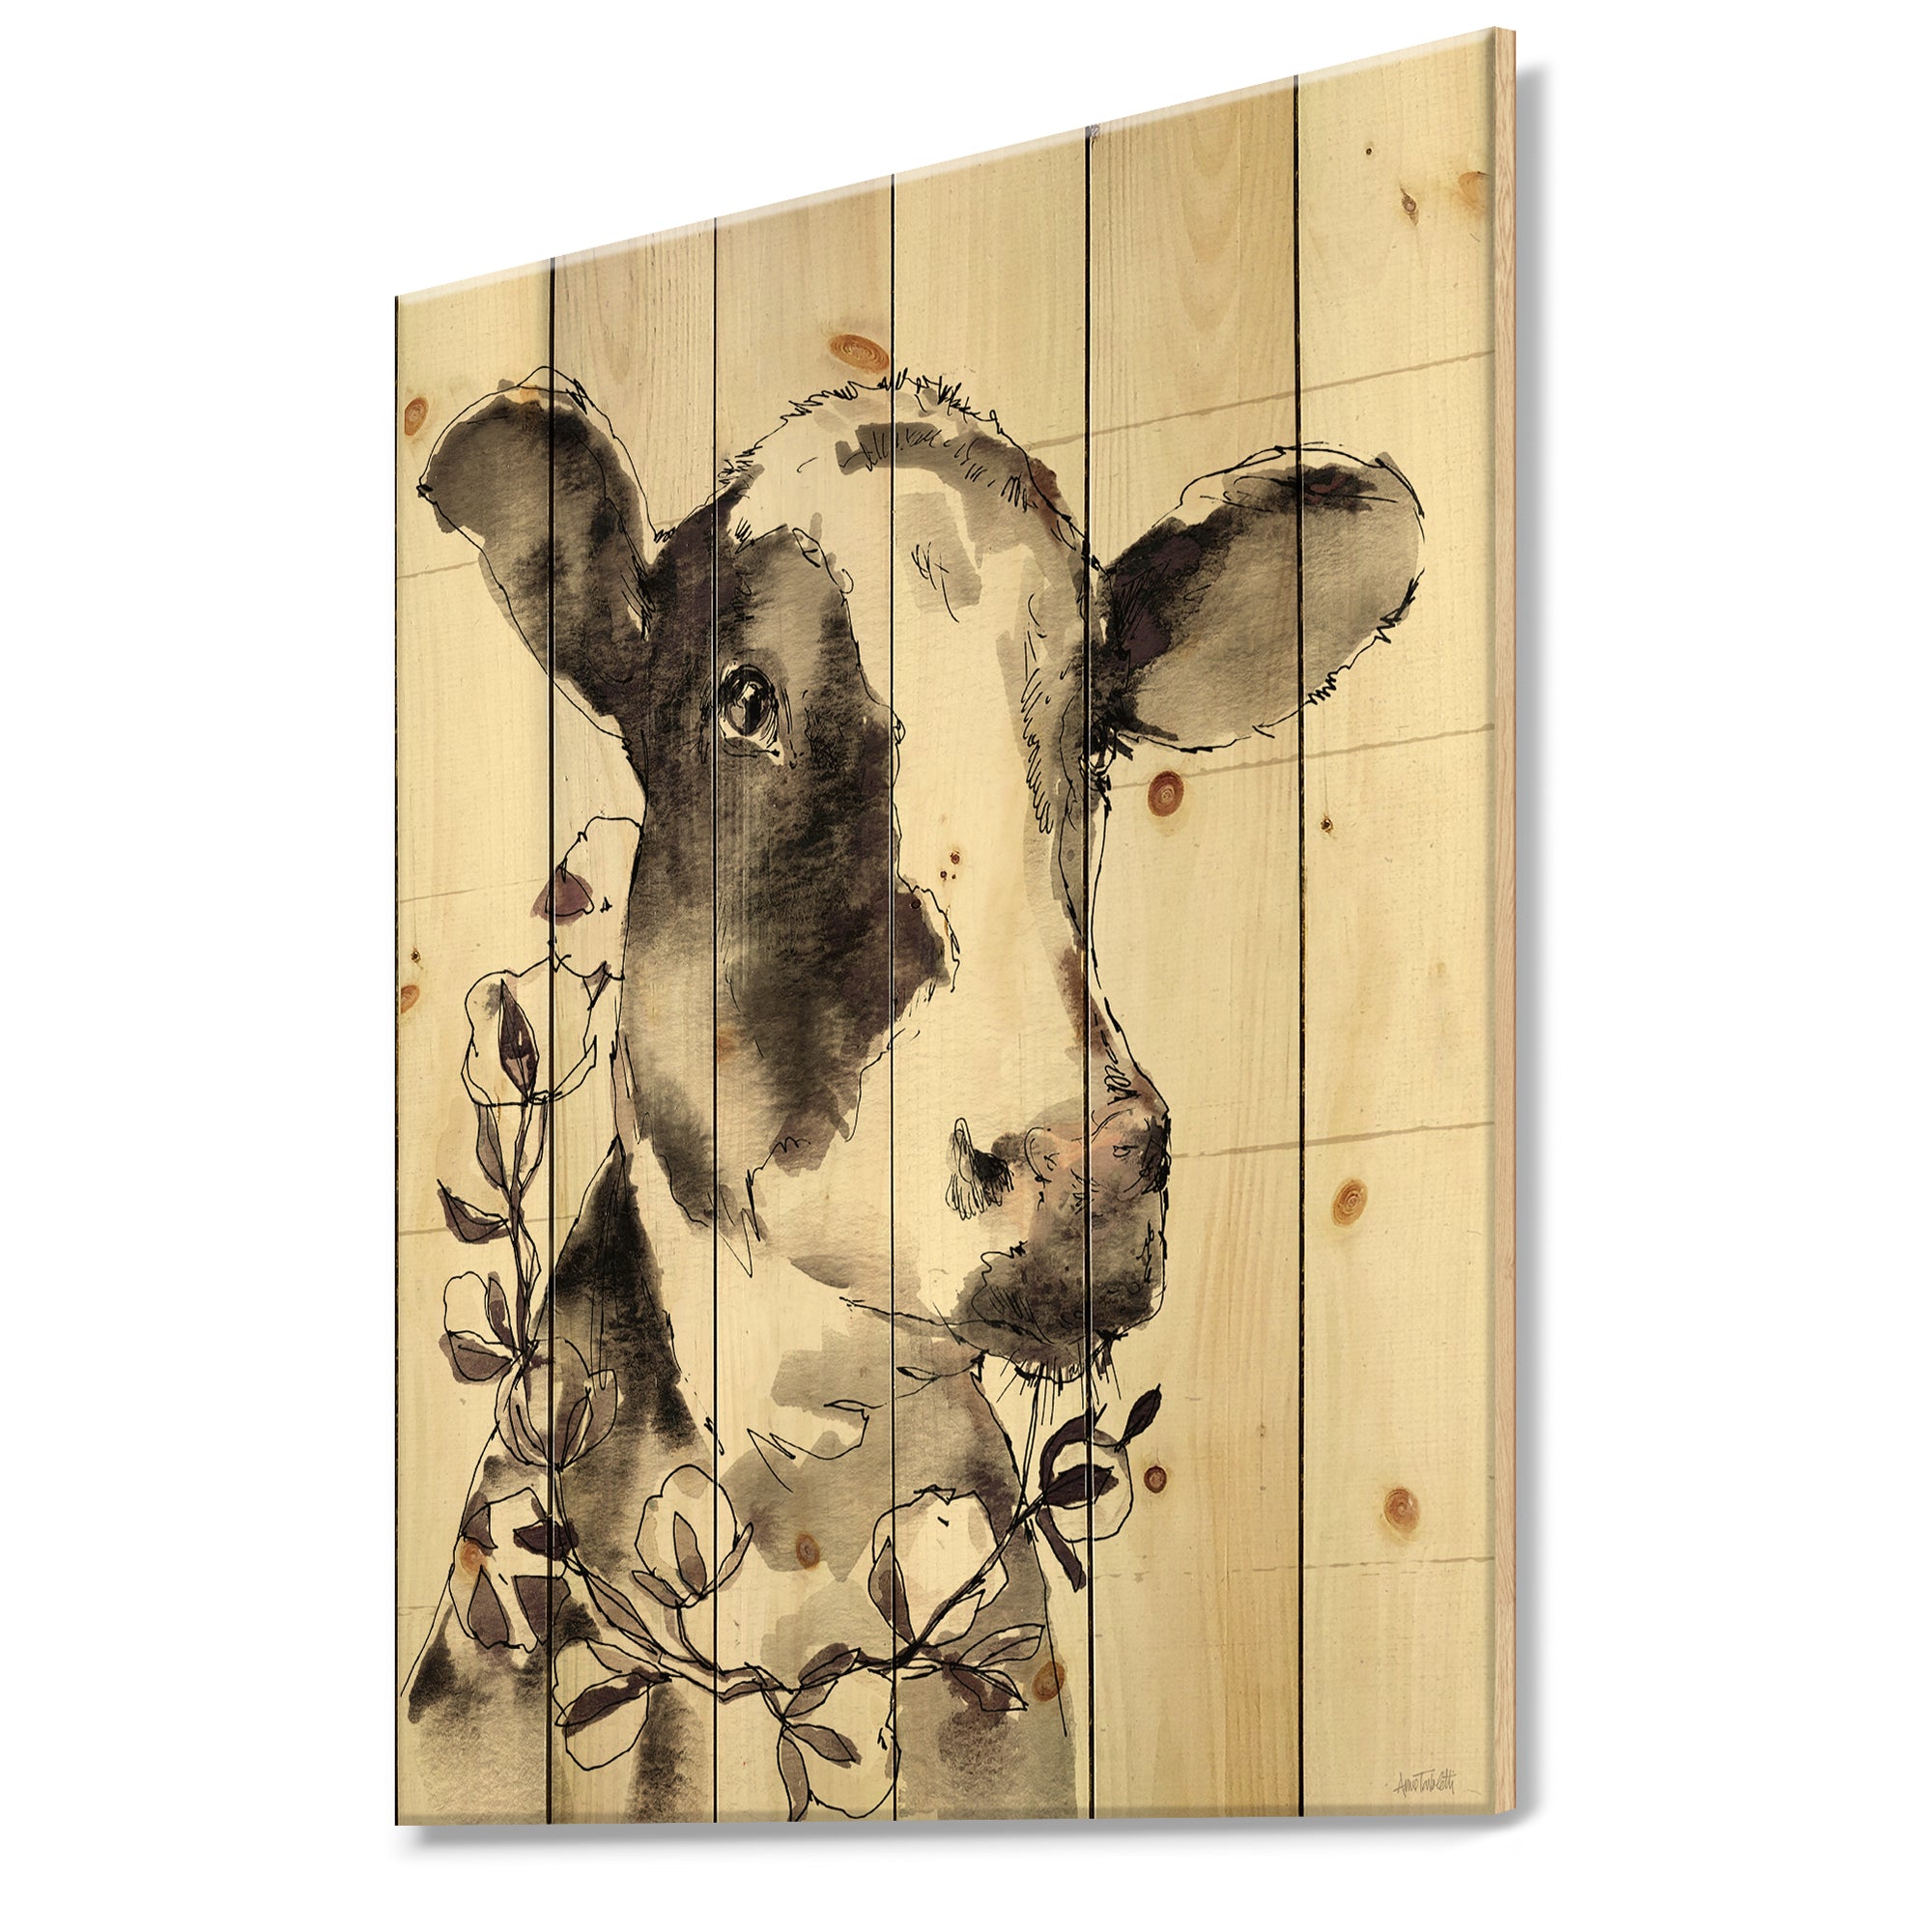 Cow Portrait Country Life - Wildlife Print on Natural Pine Wood - 15x20